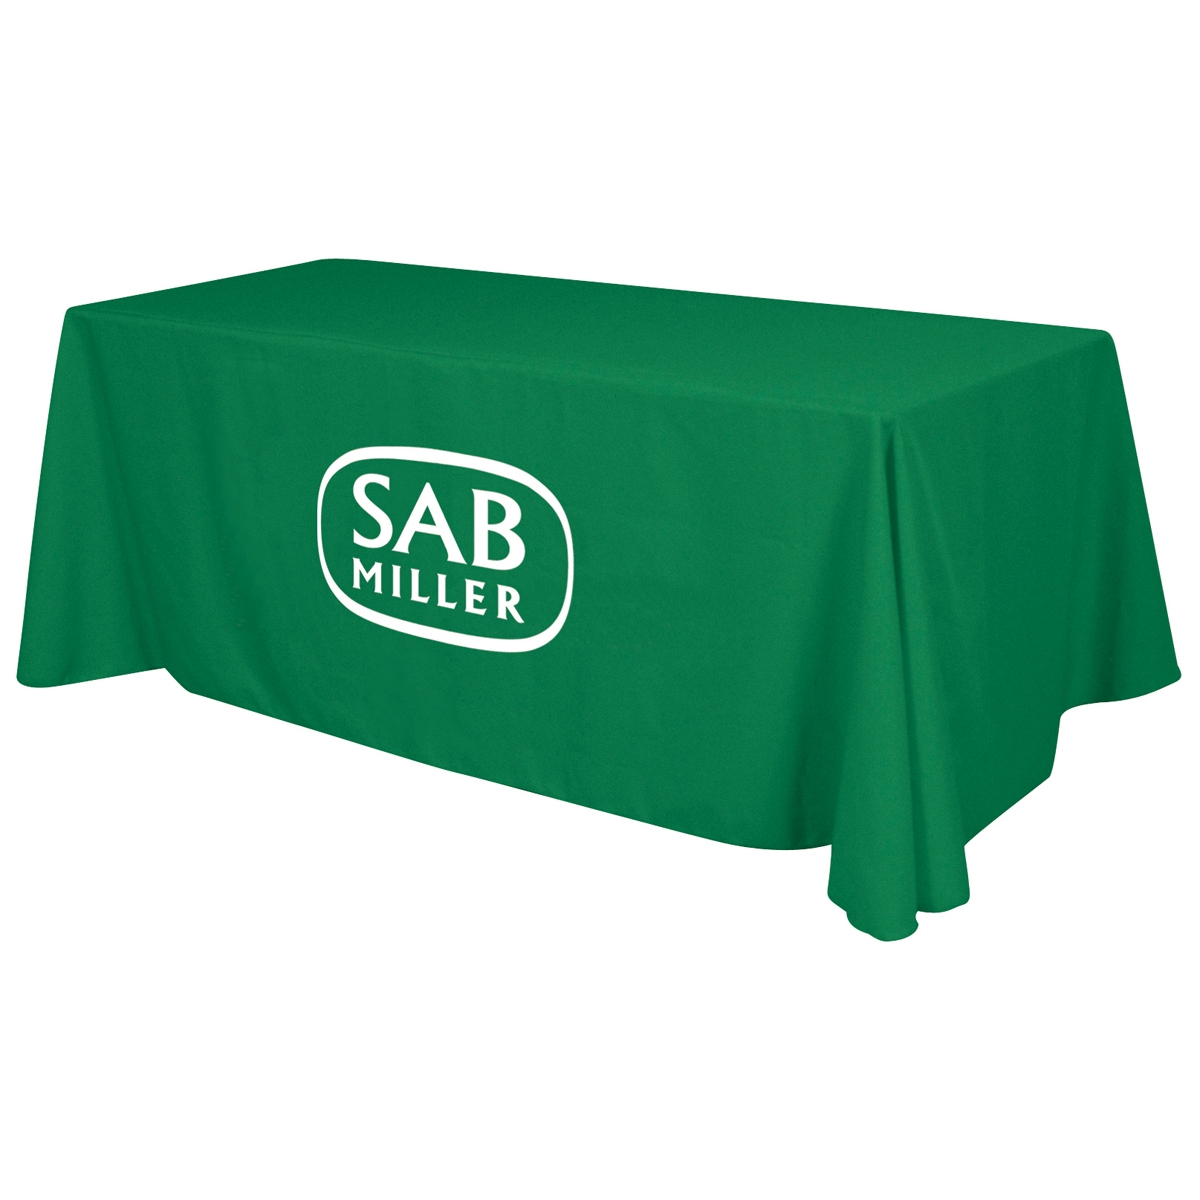 TABLE THROW COVERS